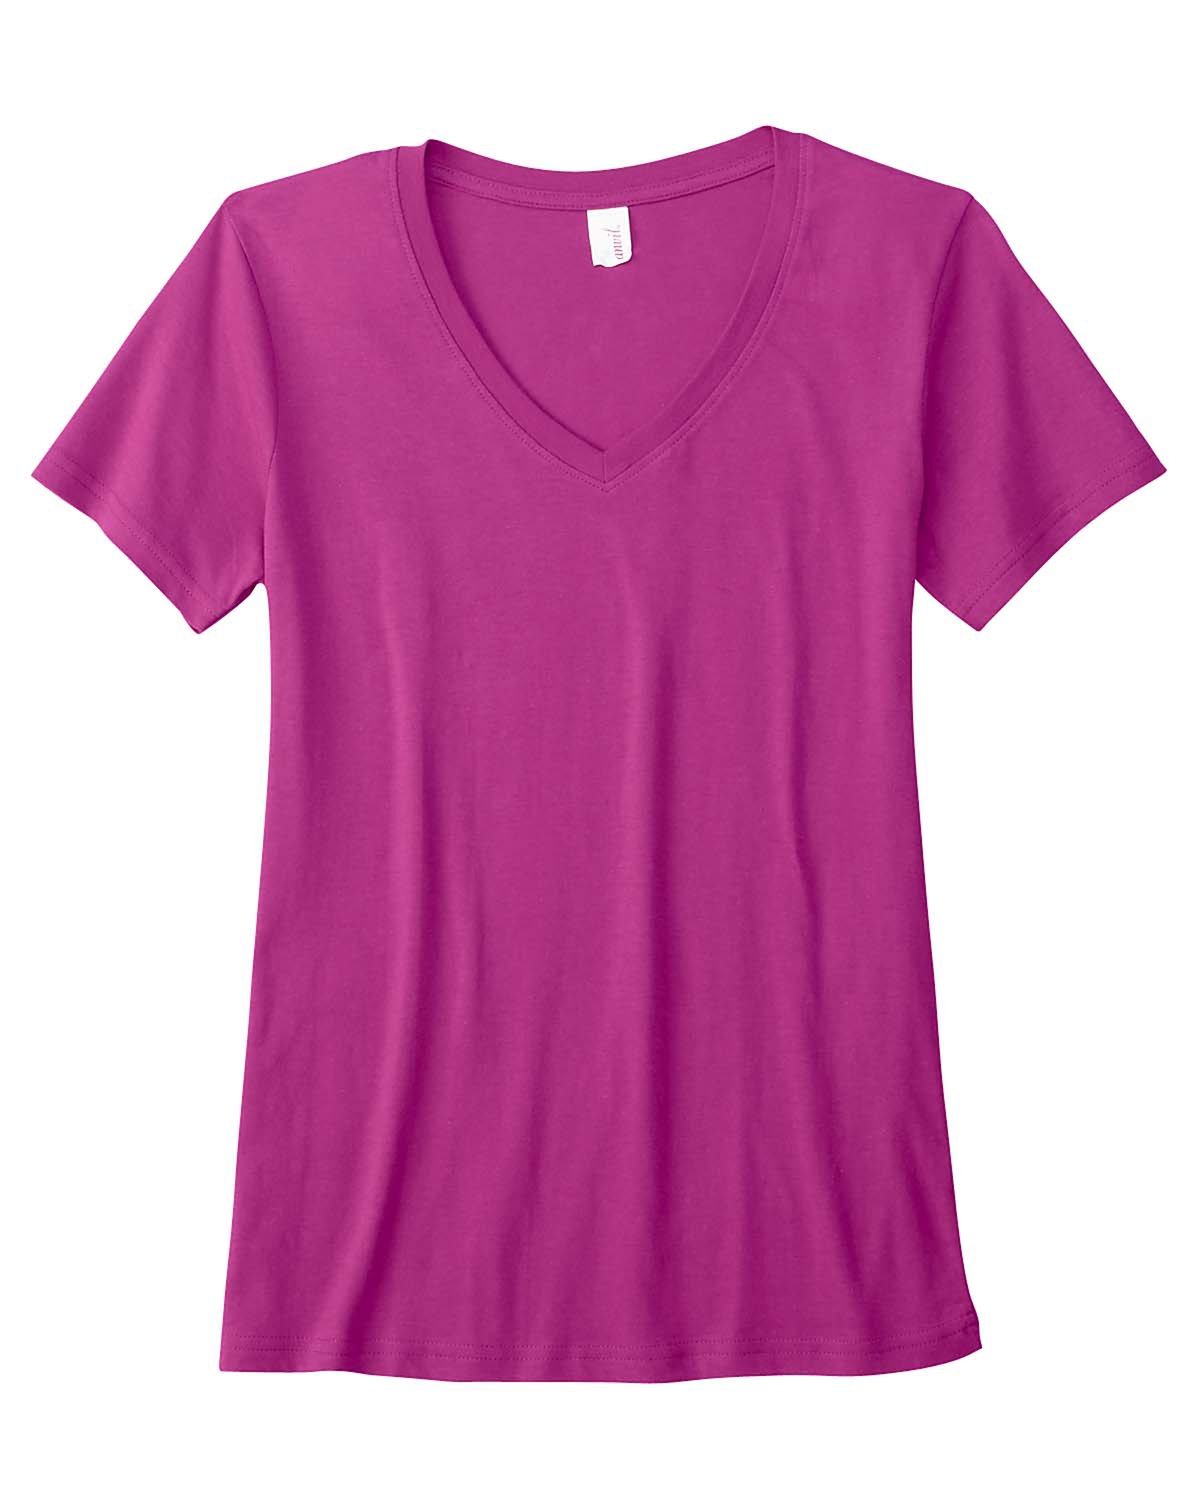 Anvil Ladies' Featherweight V-Neck T-Shirt